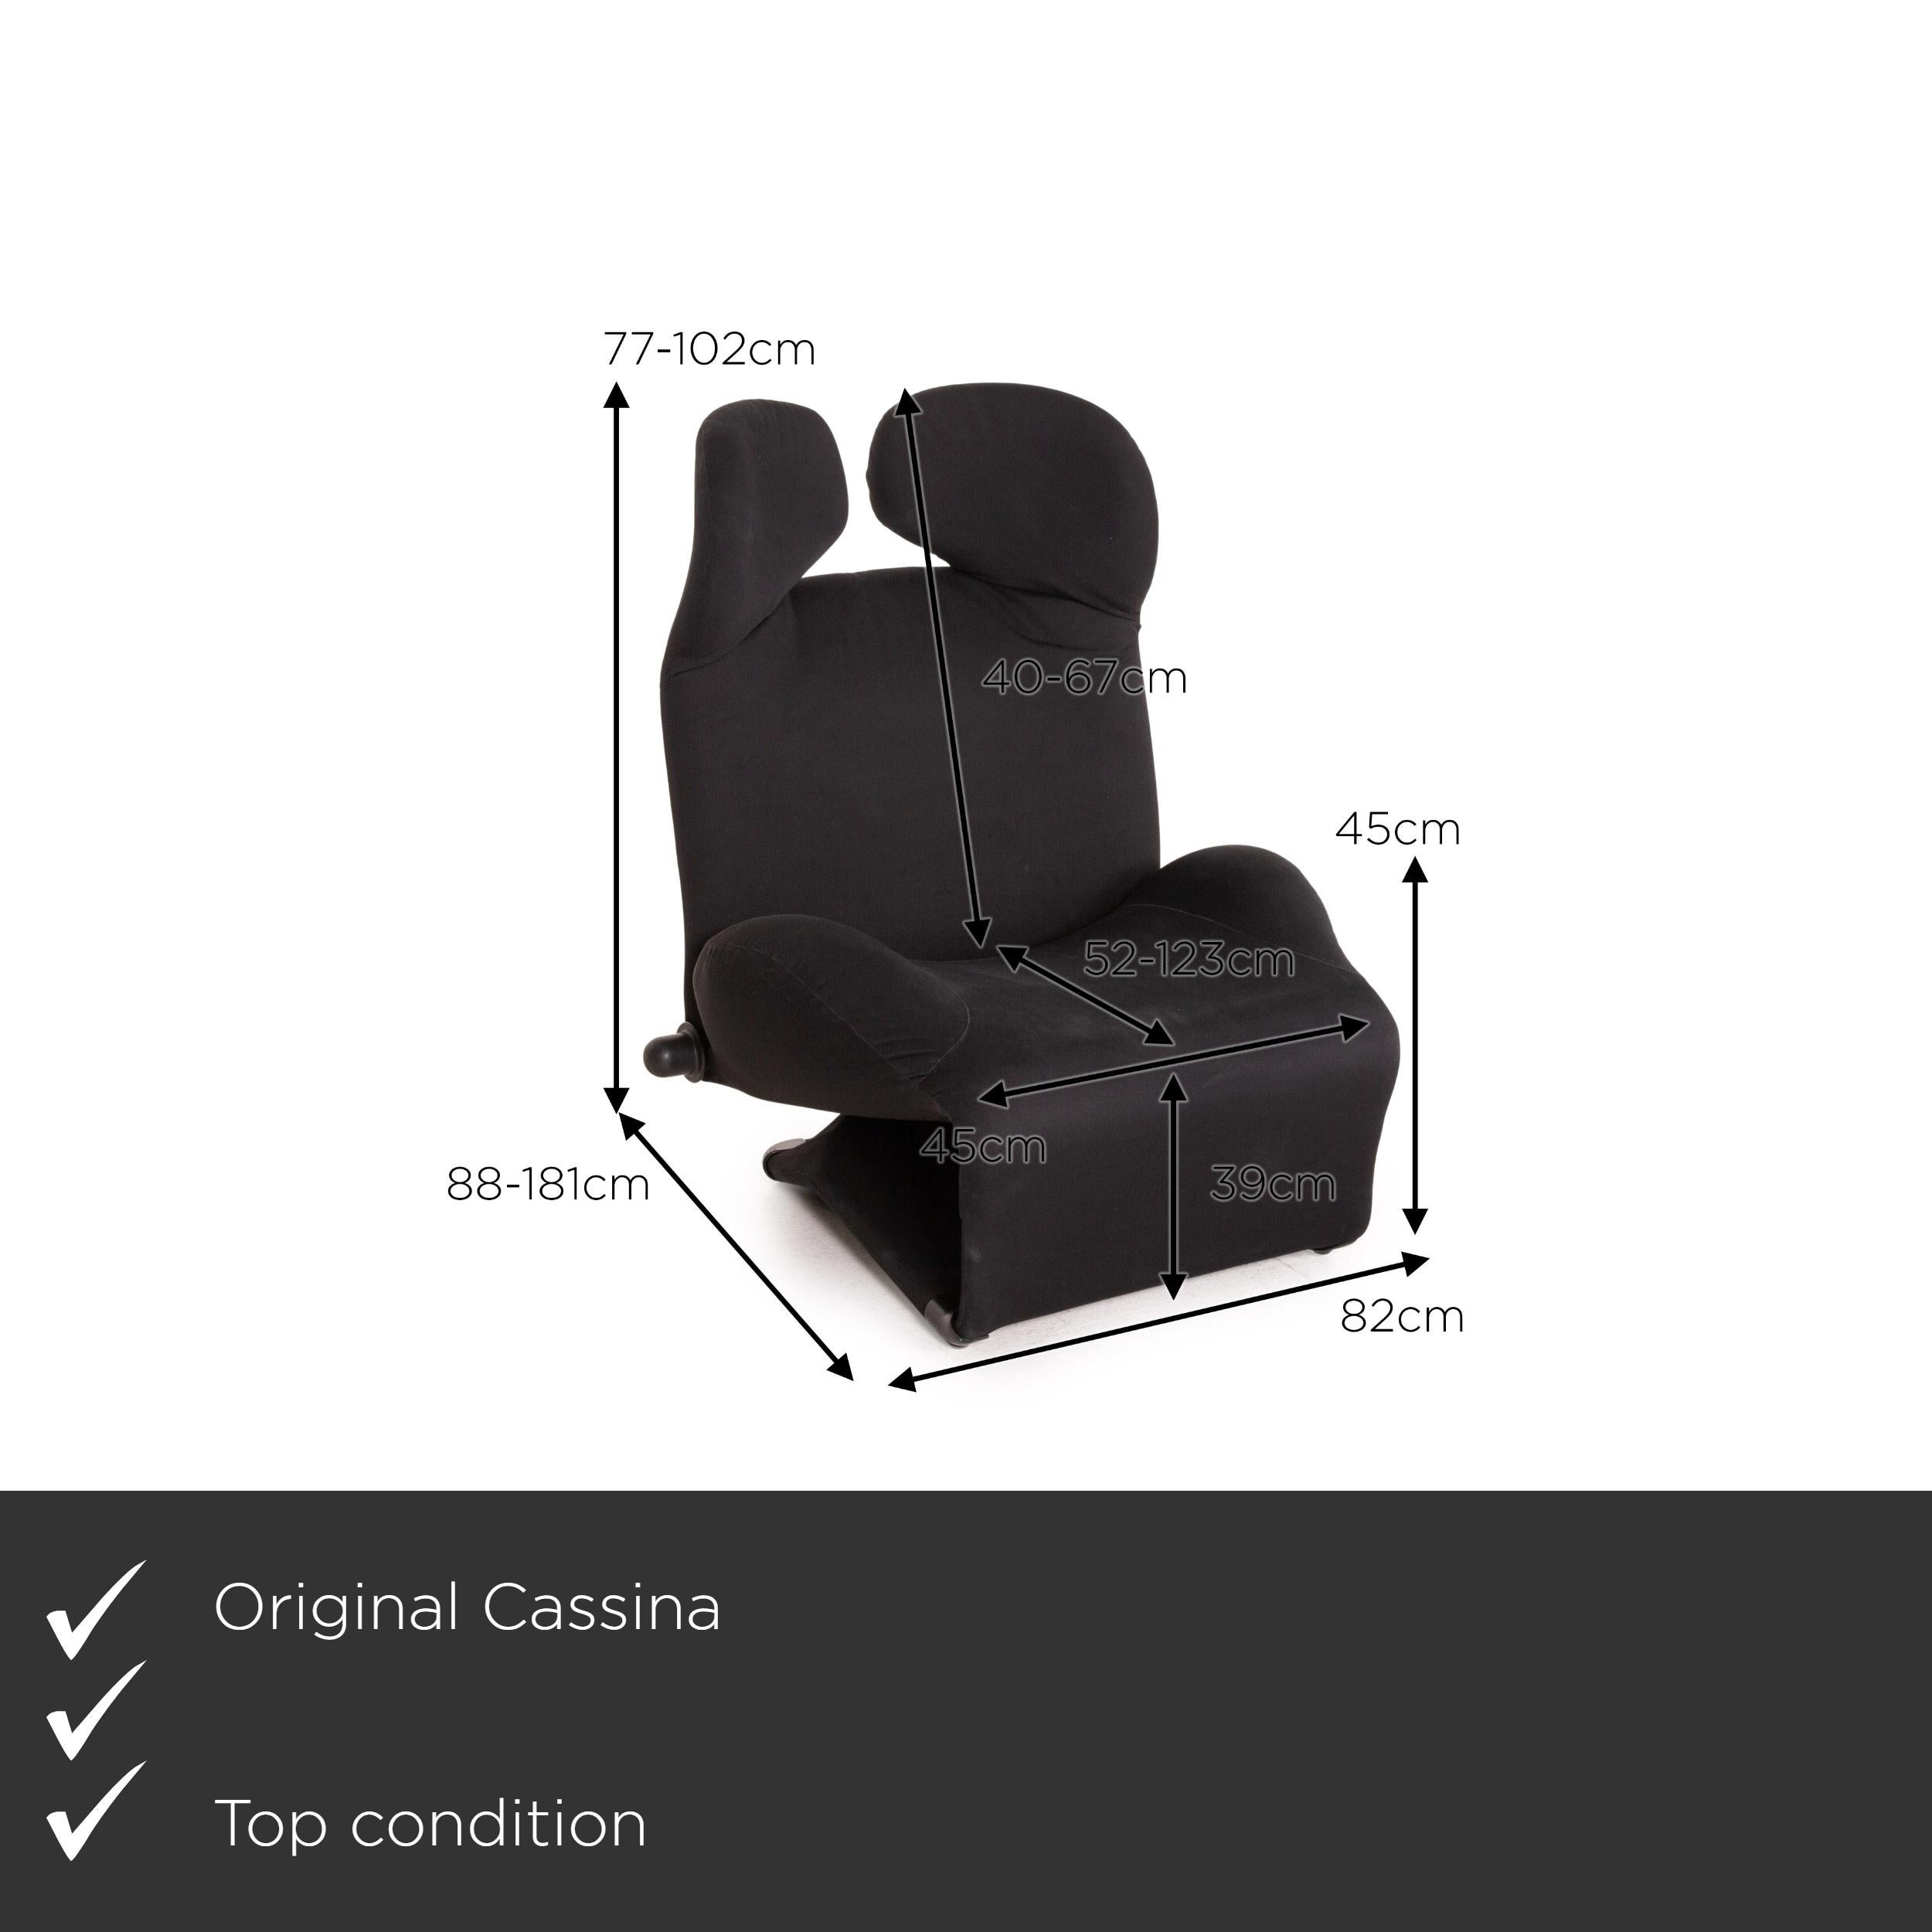 We present to you a Cassina Wink fabric armchair black.


 Product measurements in centimeters:
 

Depth: 88
Width: 82
Height: 102
Seat height: 38
Rest height: 45
Seat depth: 56
Seat width: 45
Back height: 40.
 